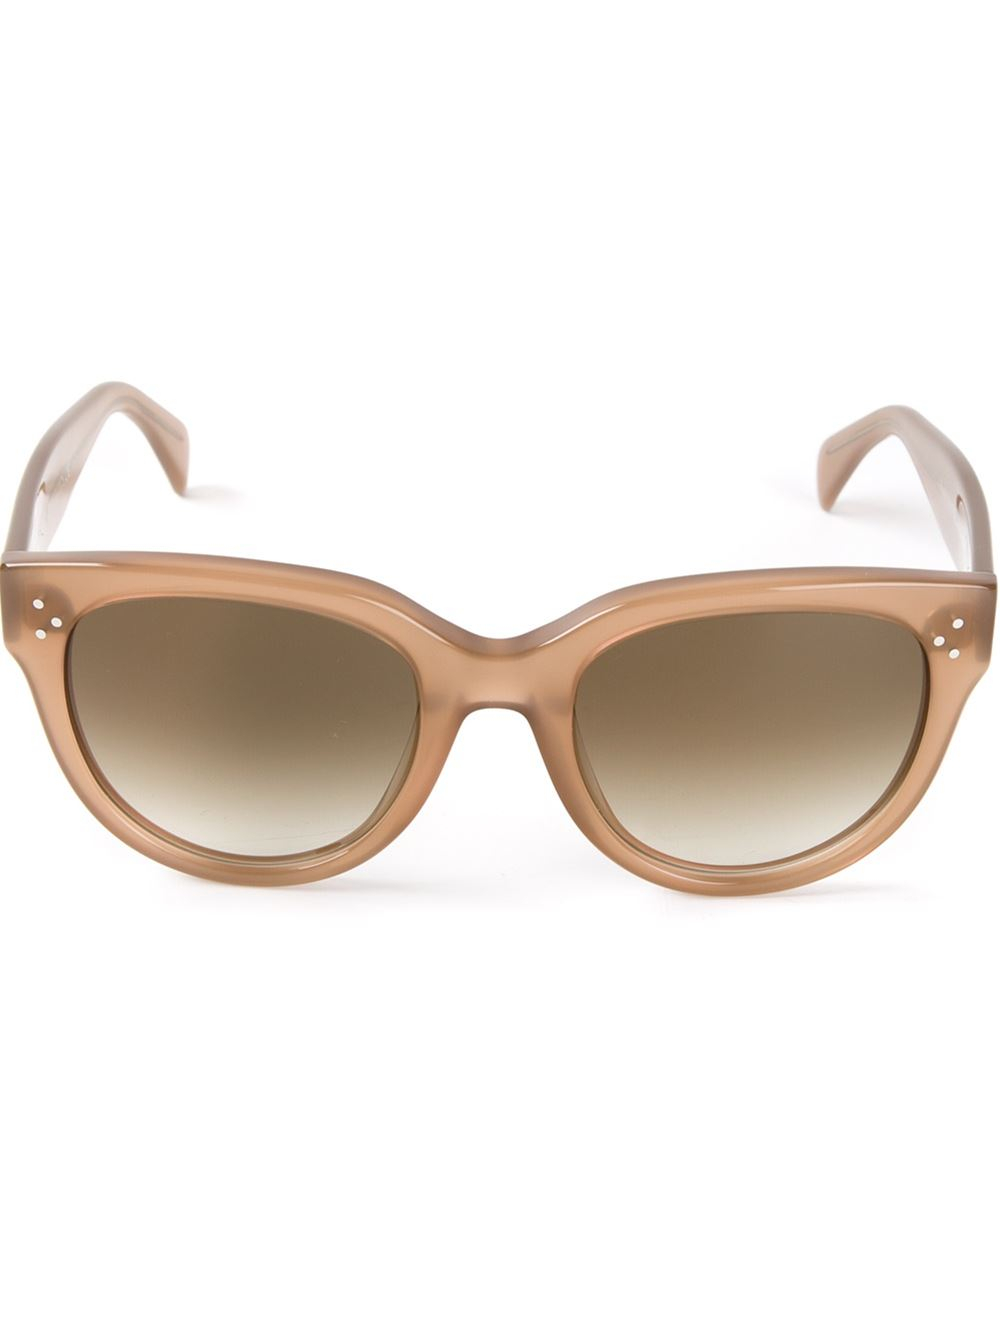 Celine Audrey Sunglasses in Natural | Lyst